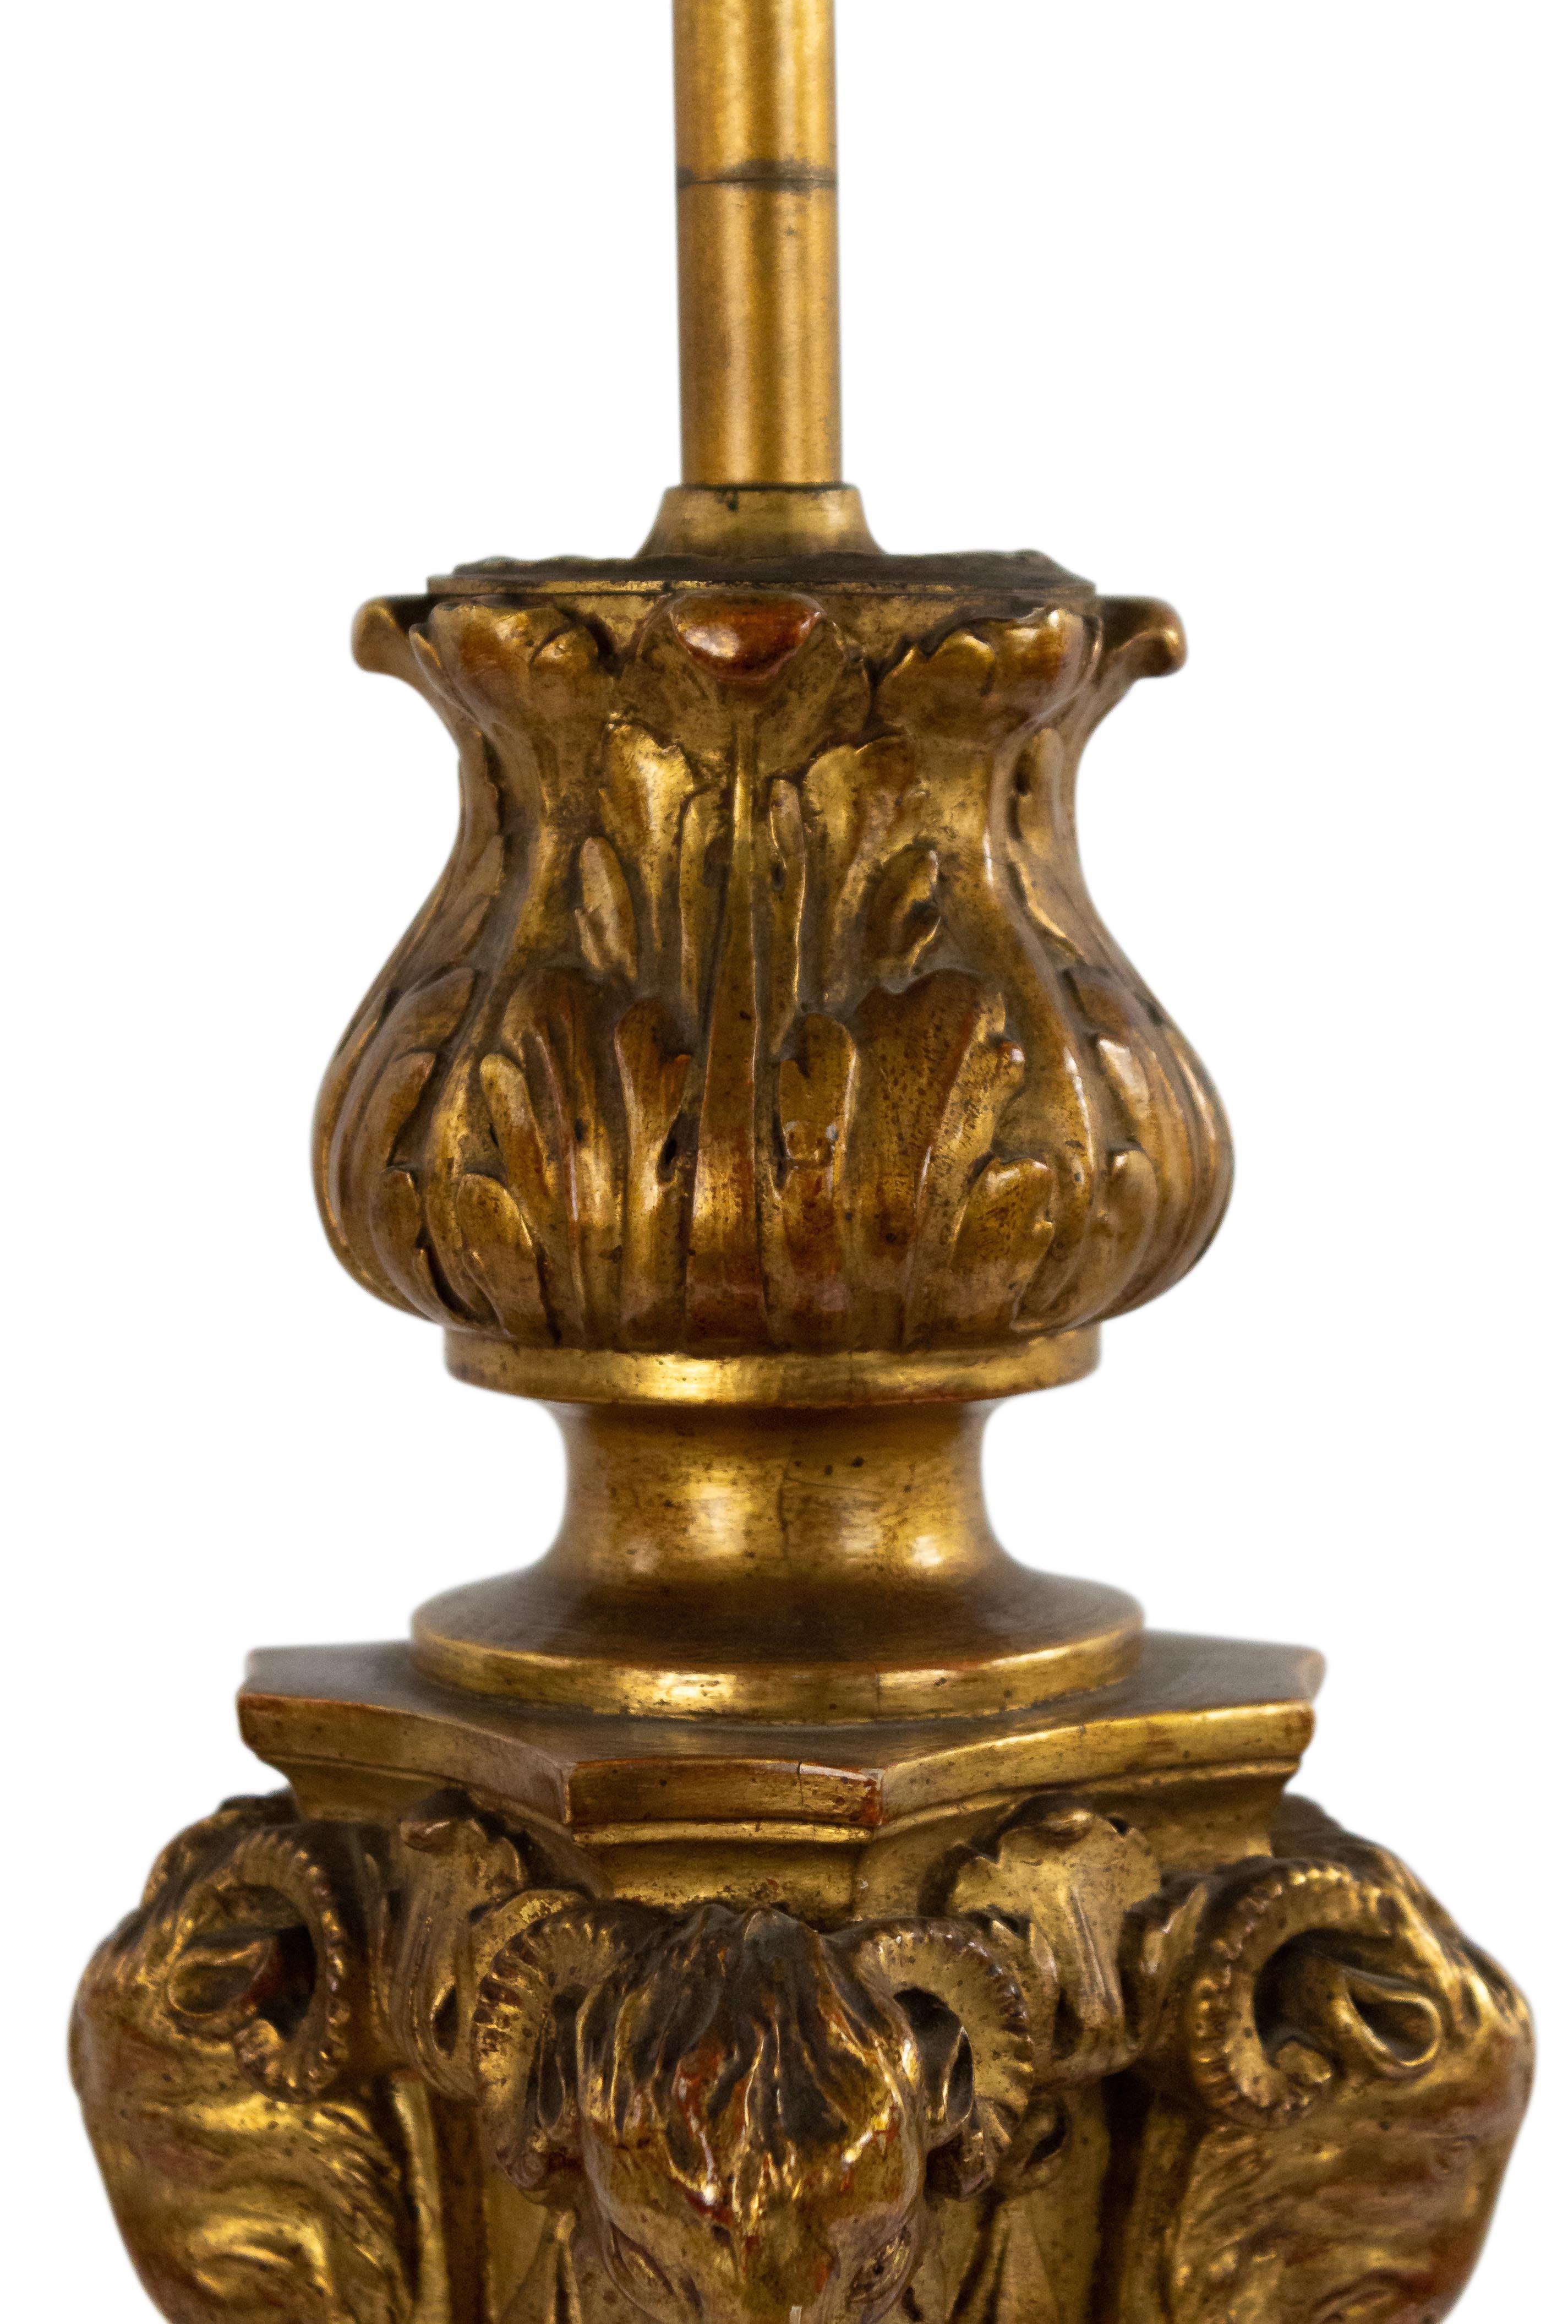 Italian neoclassic (20th century) carved giltwood lamp with ram's head and acanthus leaf details.